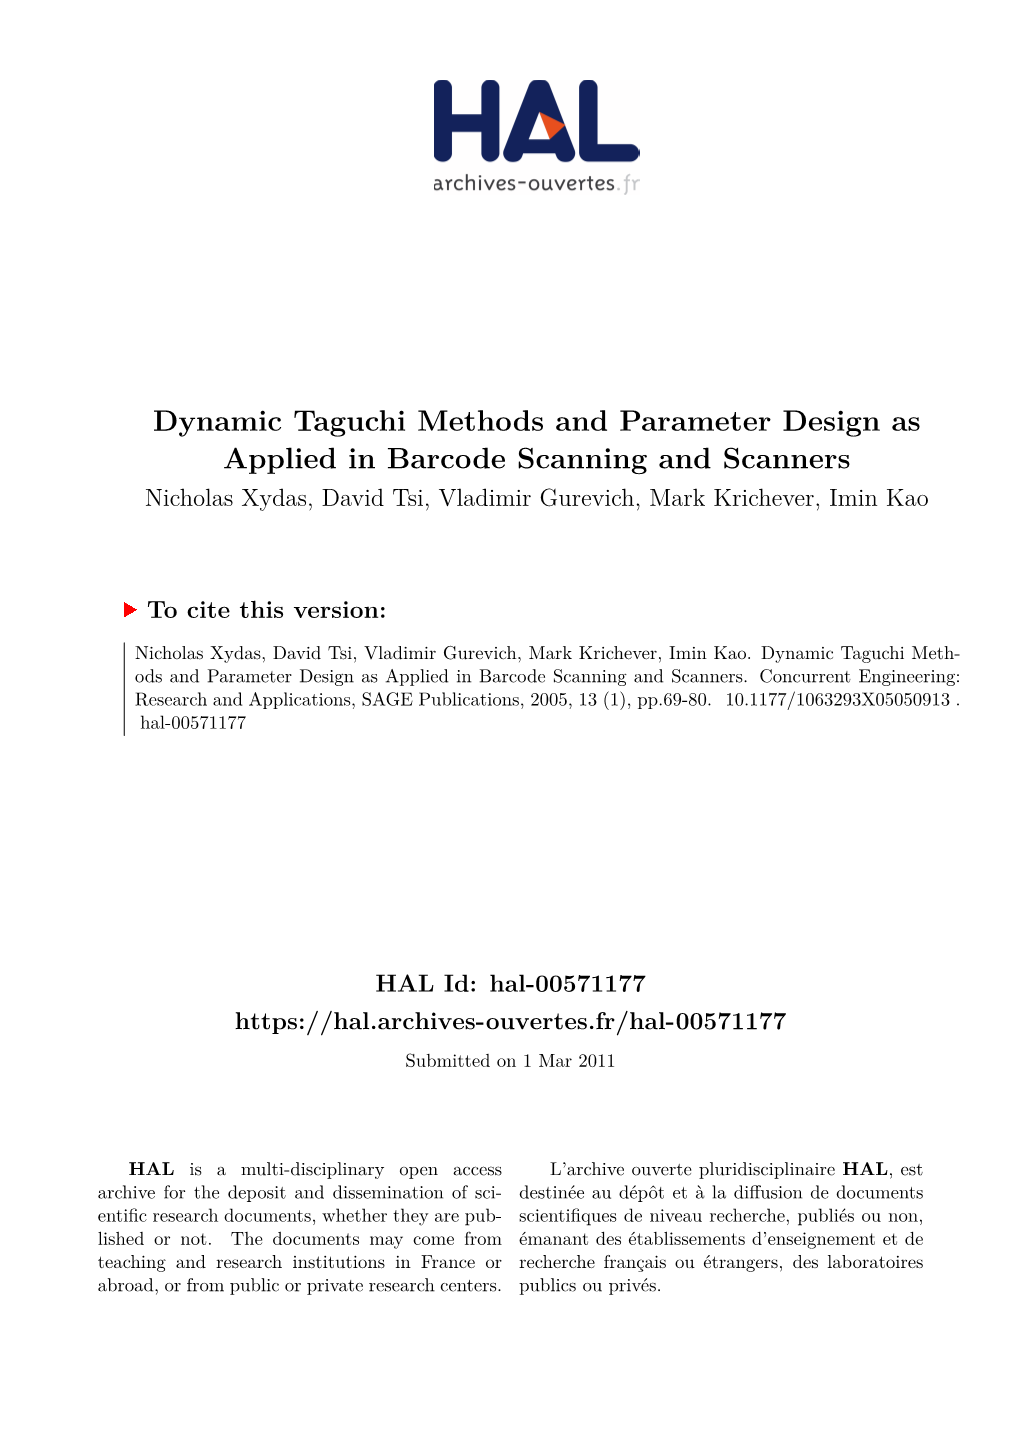 Dynamic Taguchi Methods and Parameter Design As Applied in Barcode Scanning and Scanners Nicholas Xydas, David Tsi, Vladimir Gurevich, Mark Krichever, Imin Kao